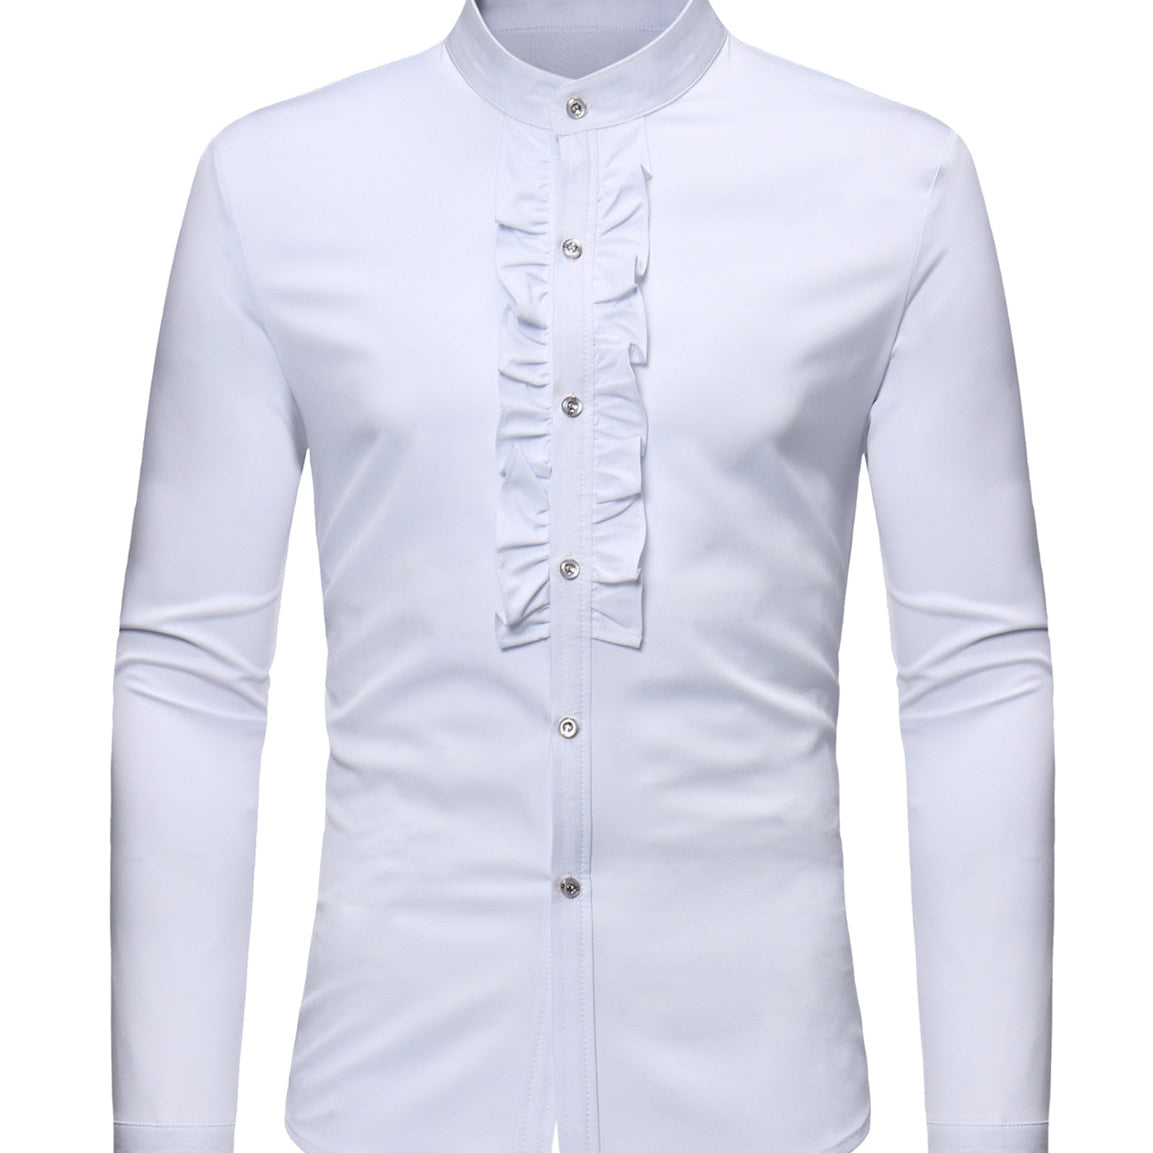 Men's Stand Collar Lace Solid Color Long Sleeve Tuxedo Dress Shirt